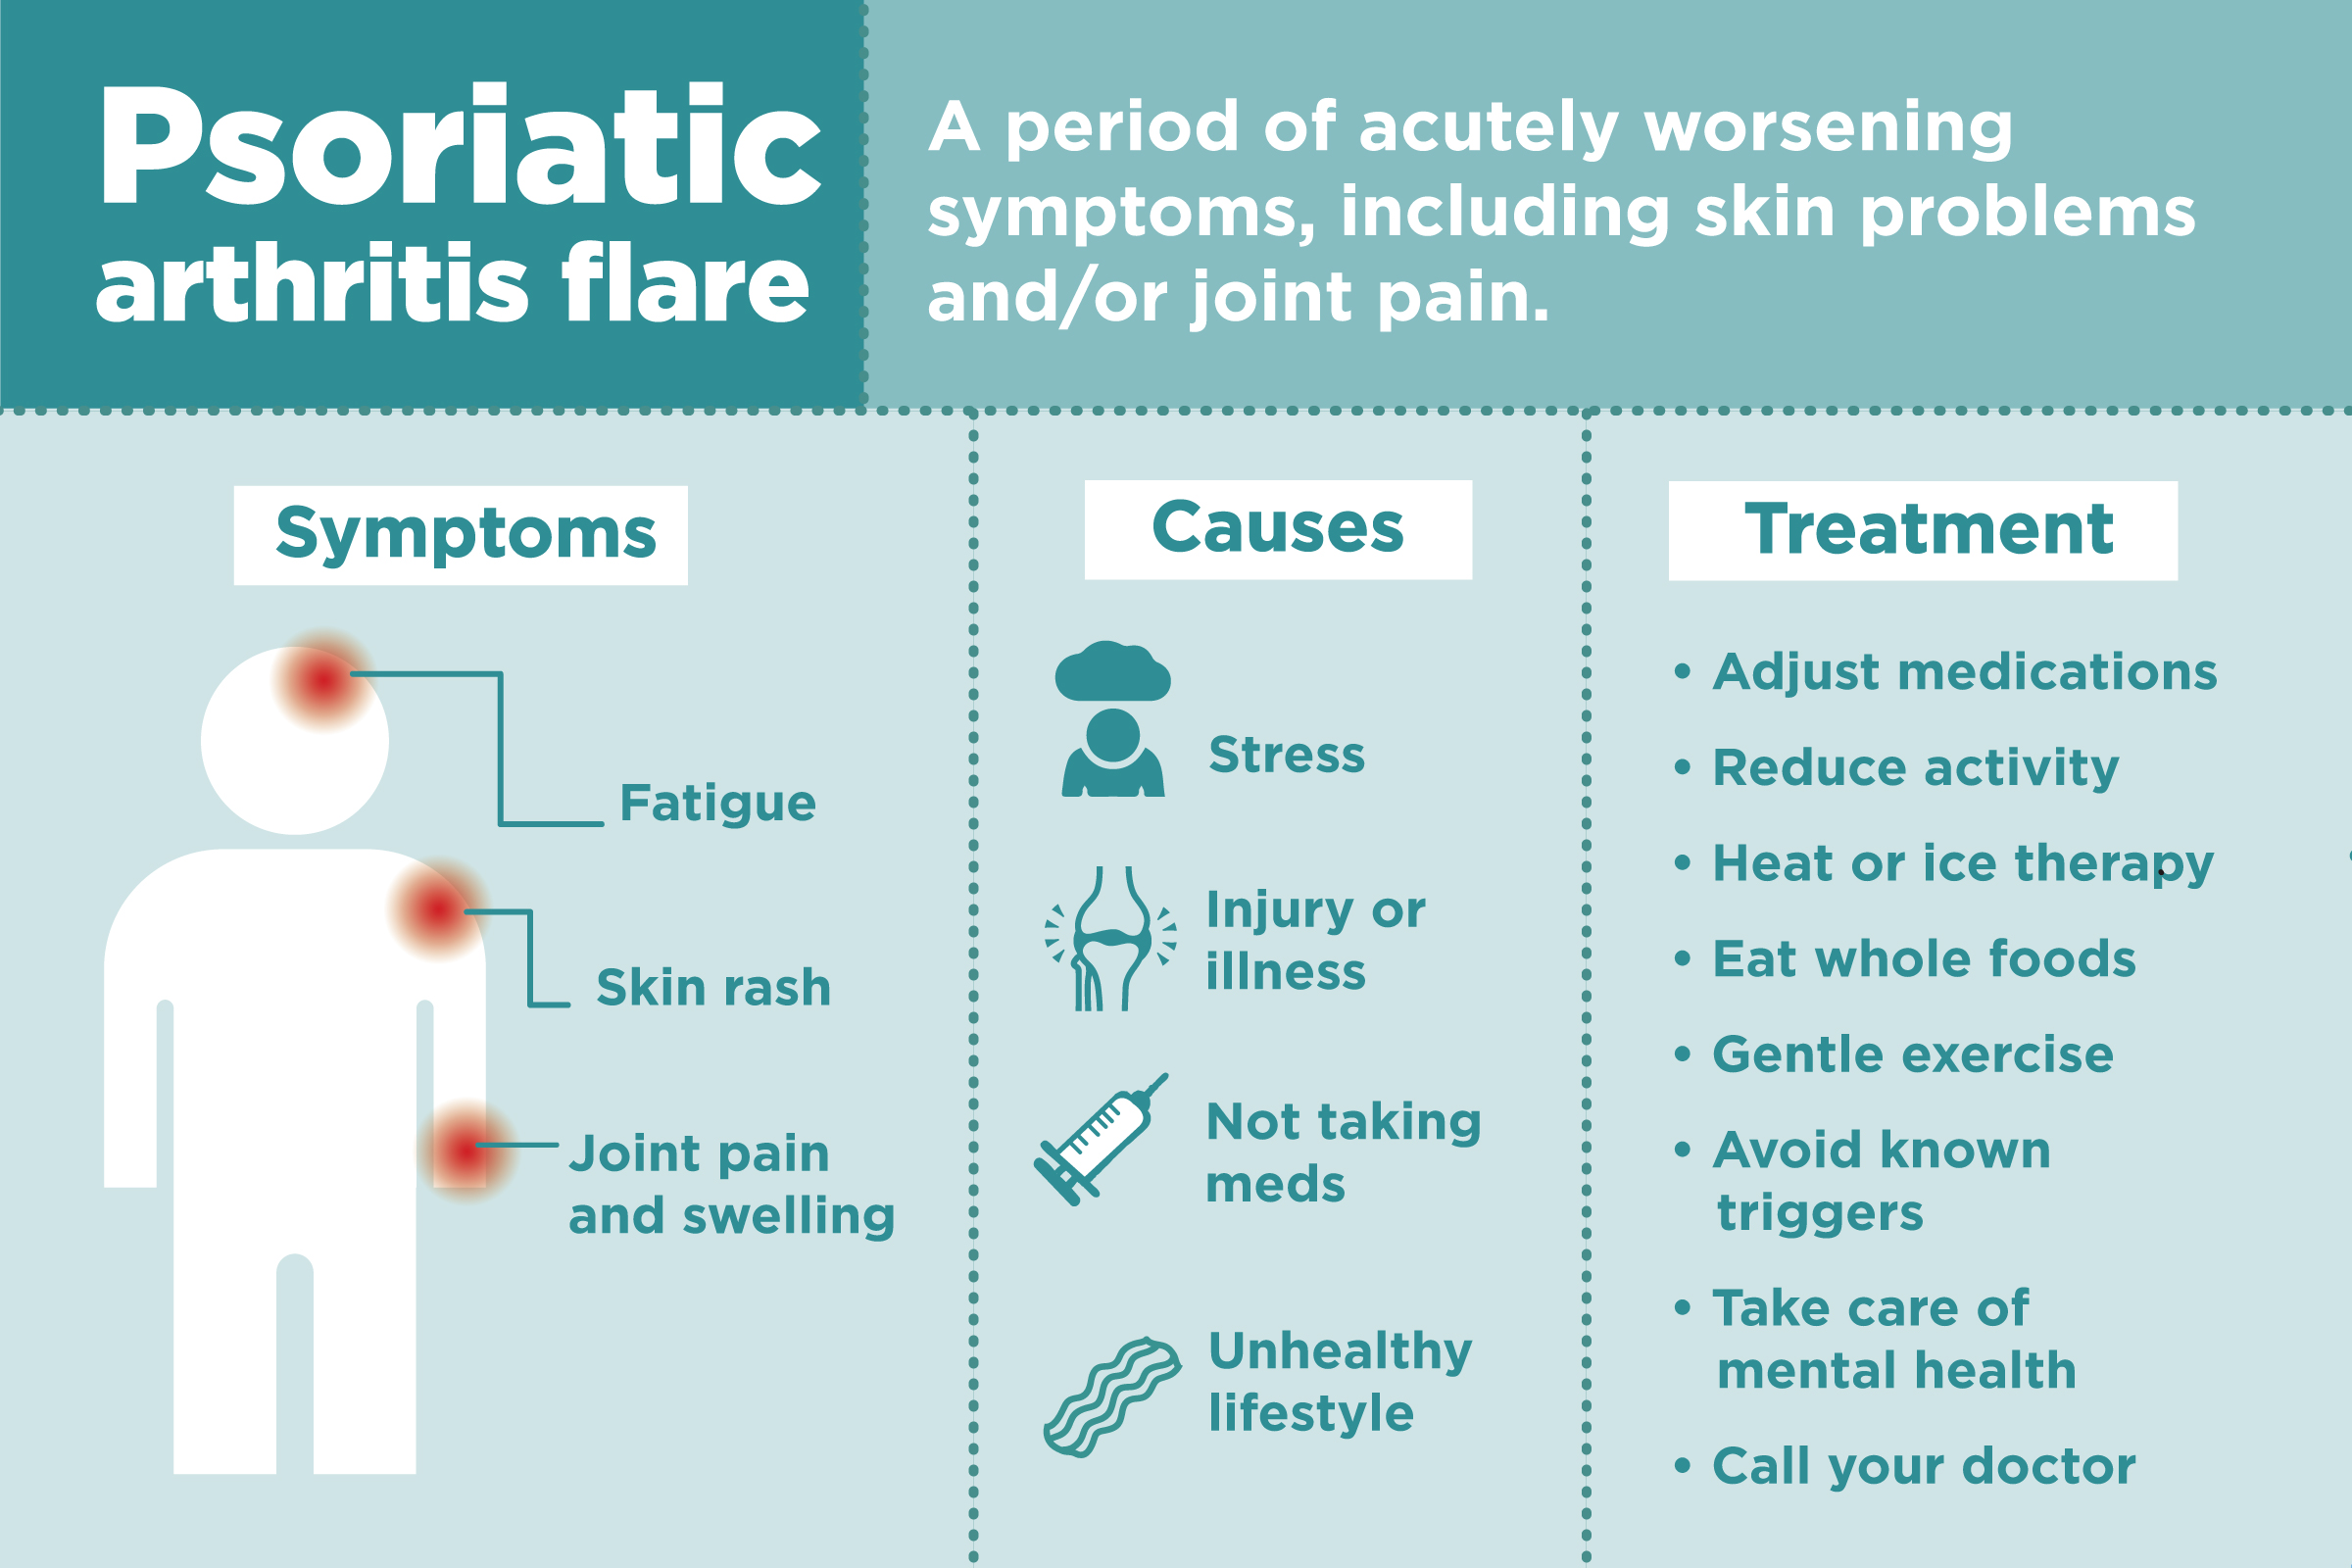 medications that cause psoriasis flare ups